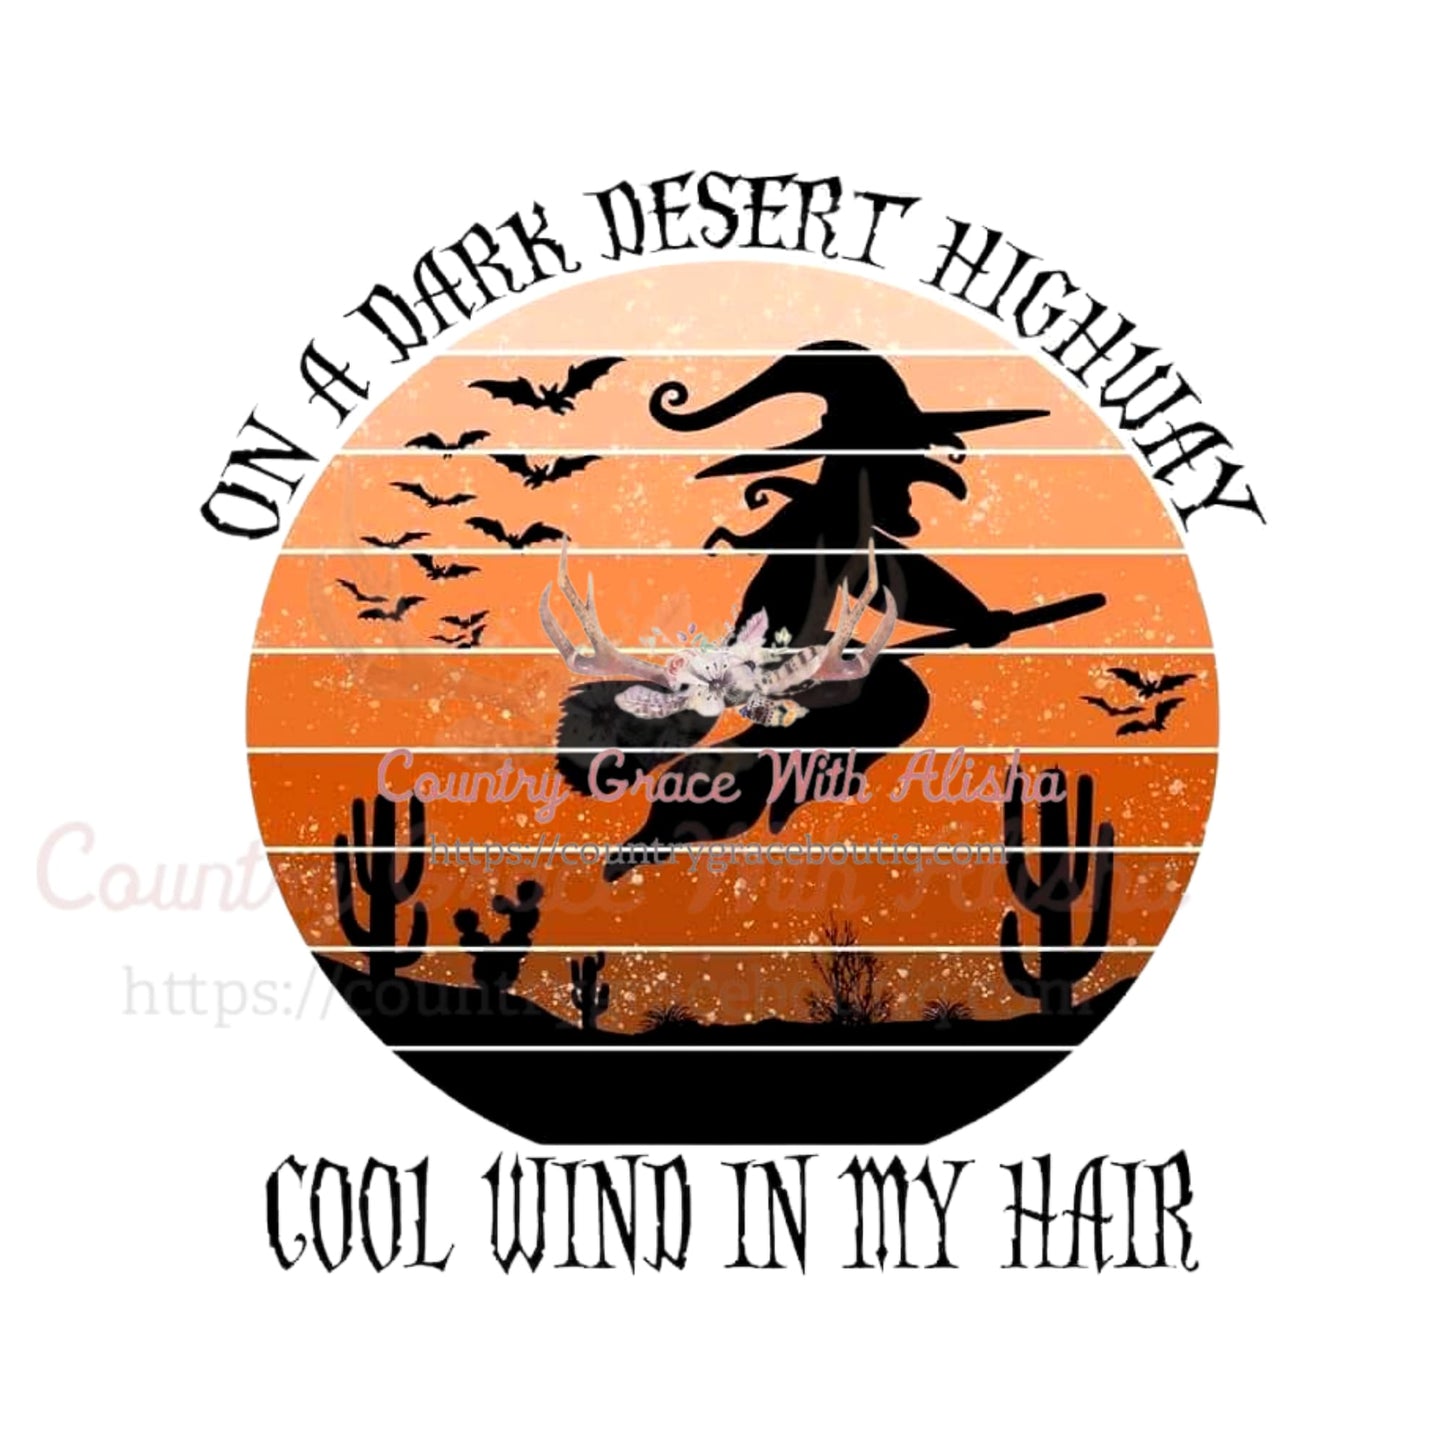 Witch Desert Highway Sublimation Transfer - Sub $1.50 